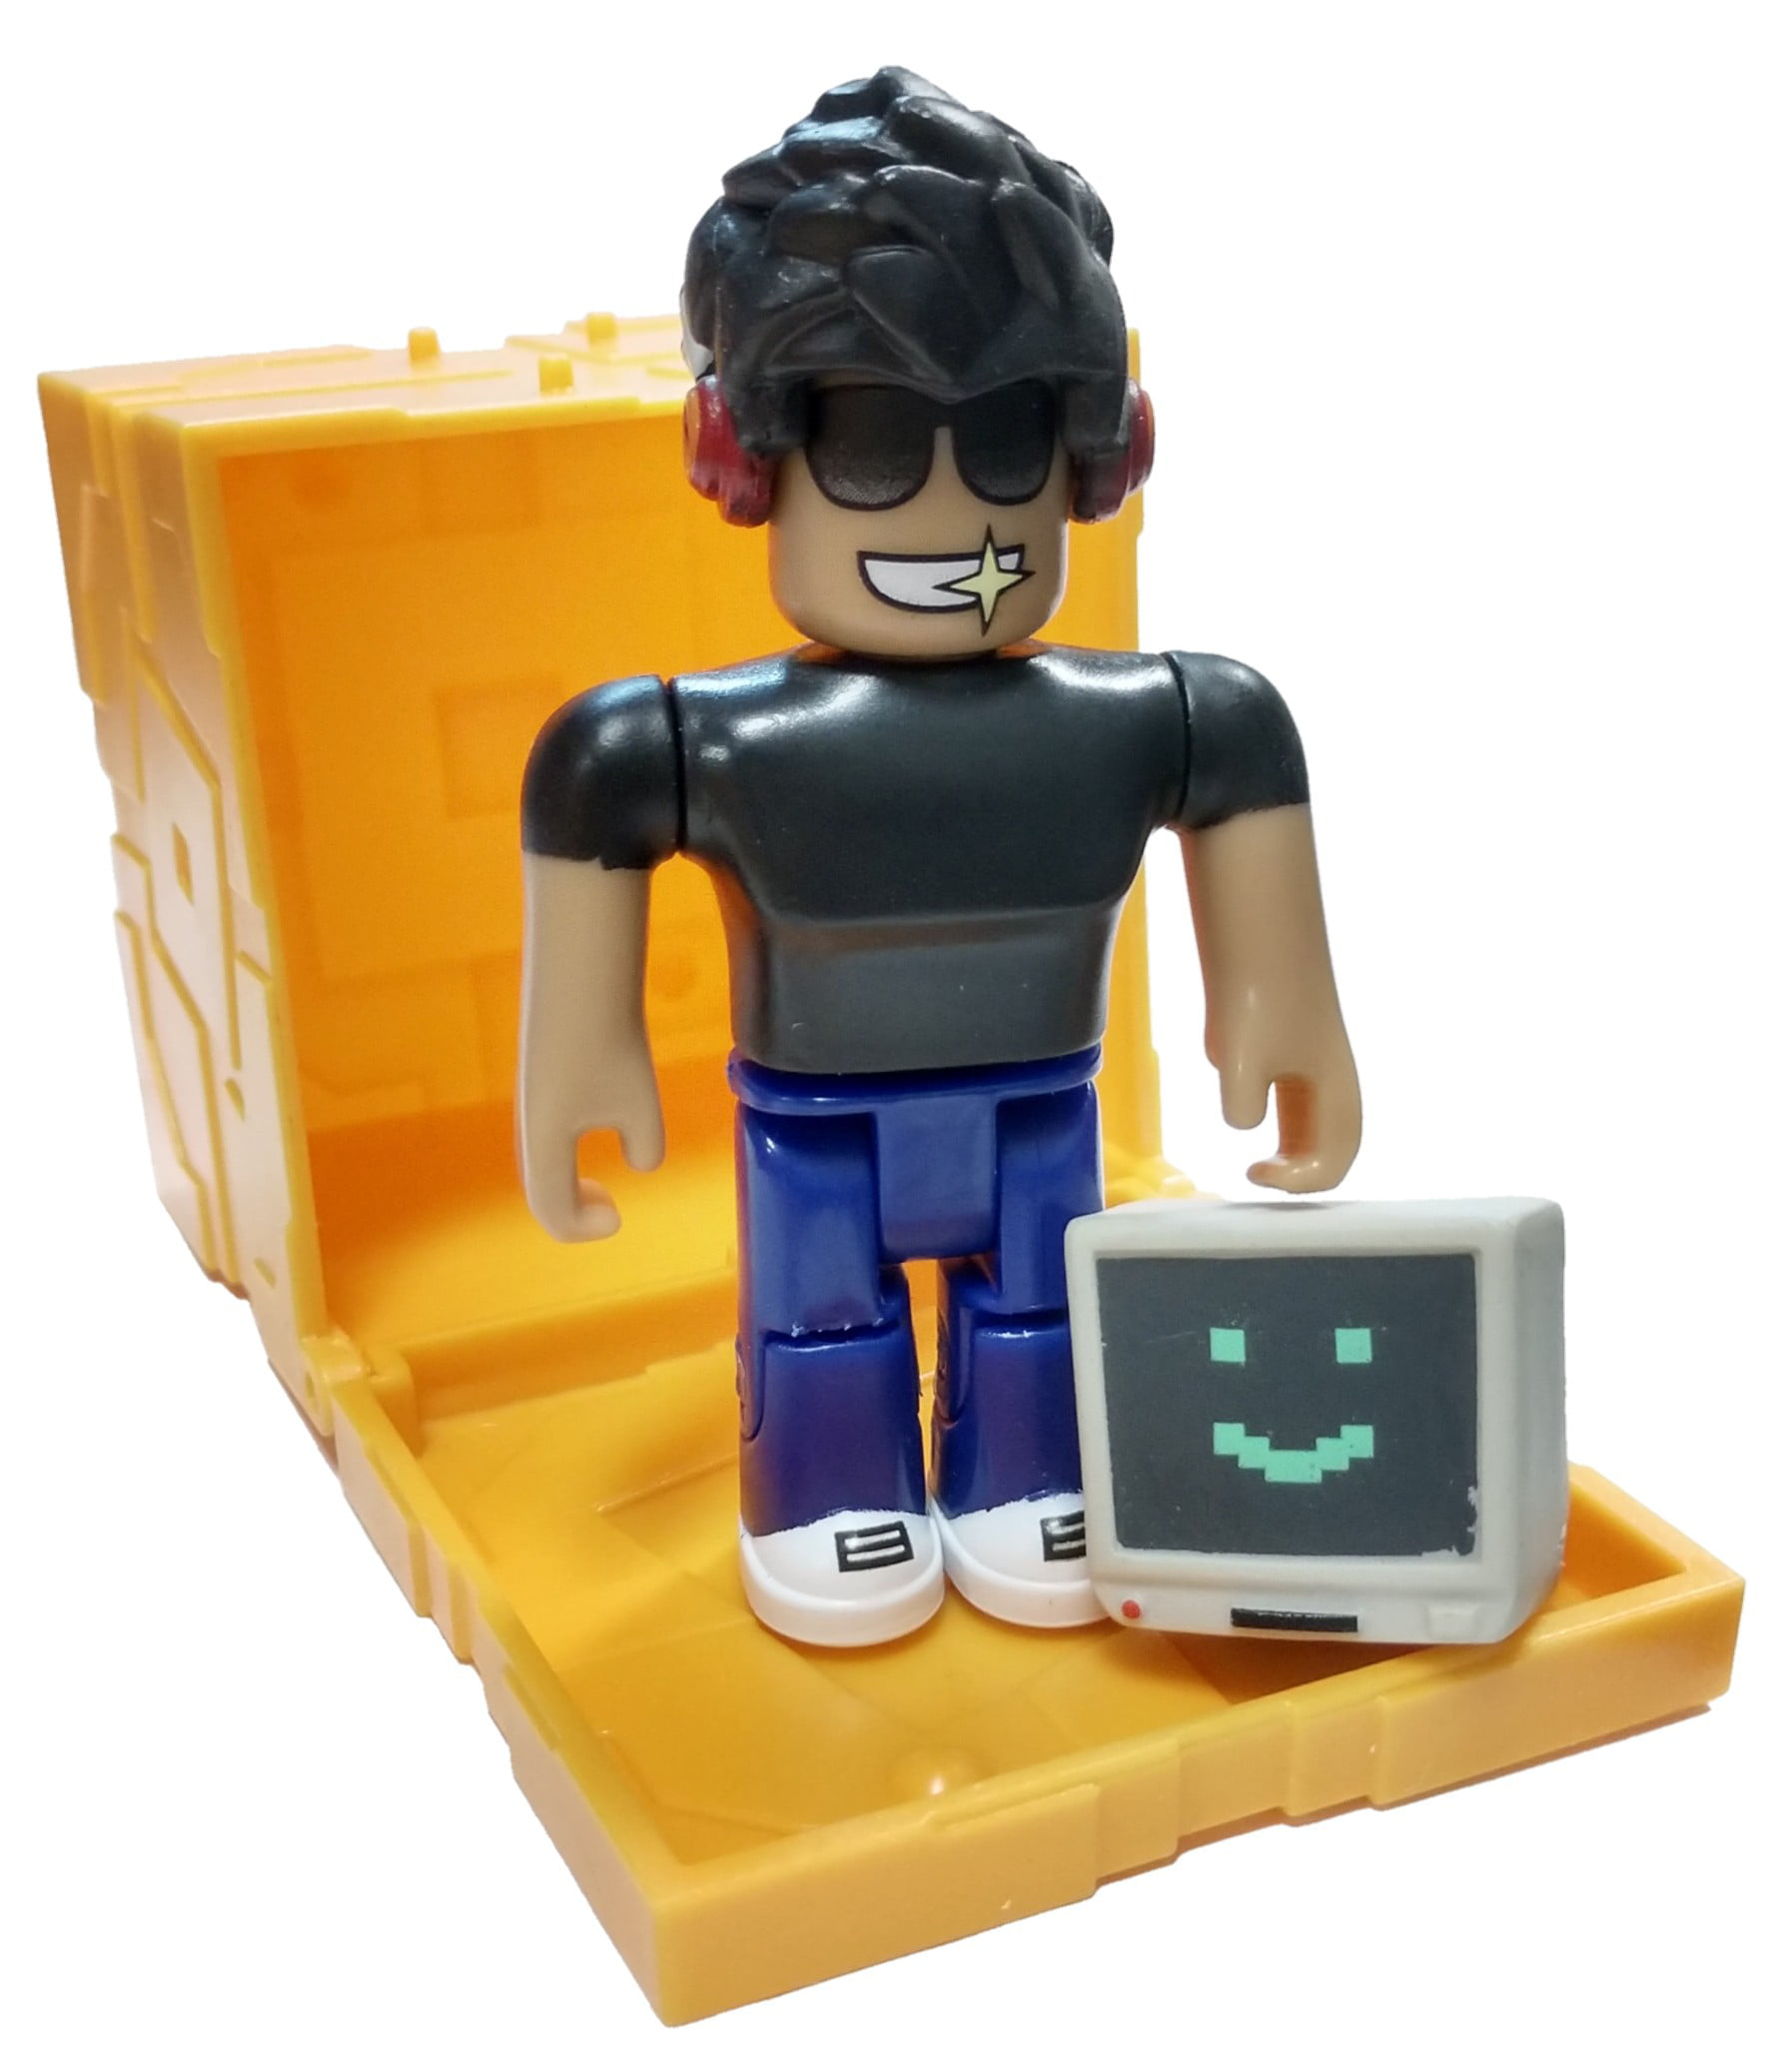 Roblox Series 5 Simbuilder Mini Figure With Gold Cube And Online Code No Packaging Walmart Com Walmart Com - roblox series 5 codes